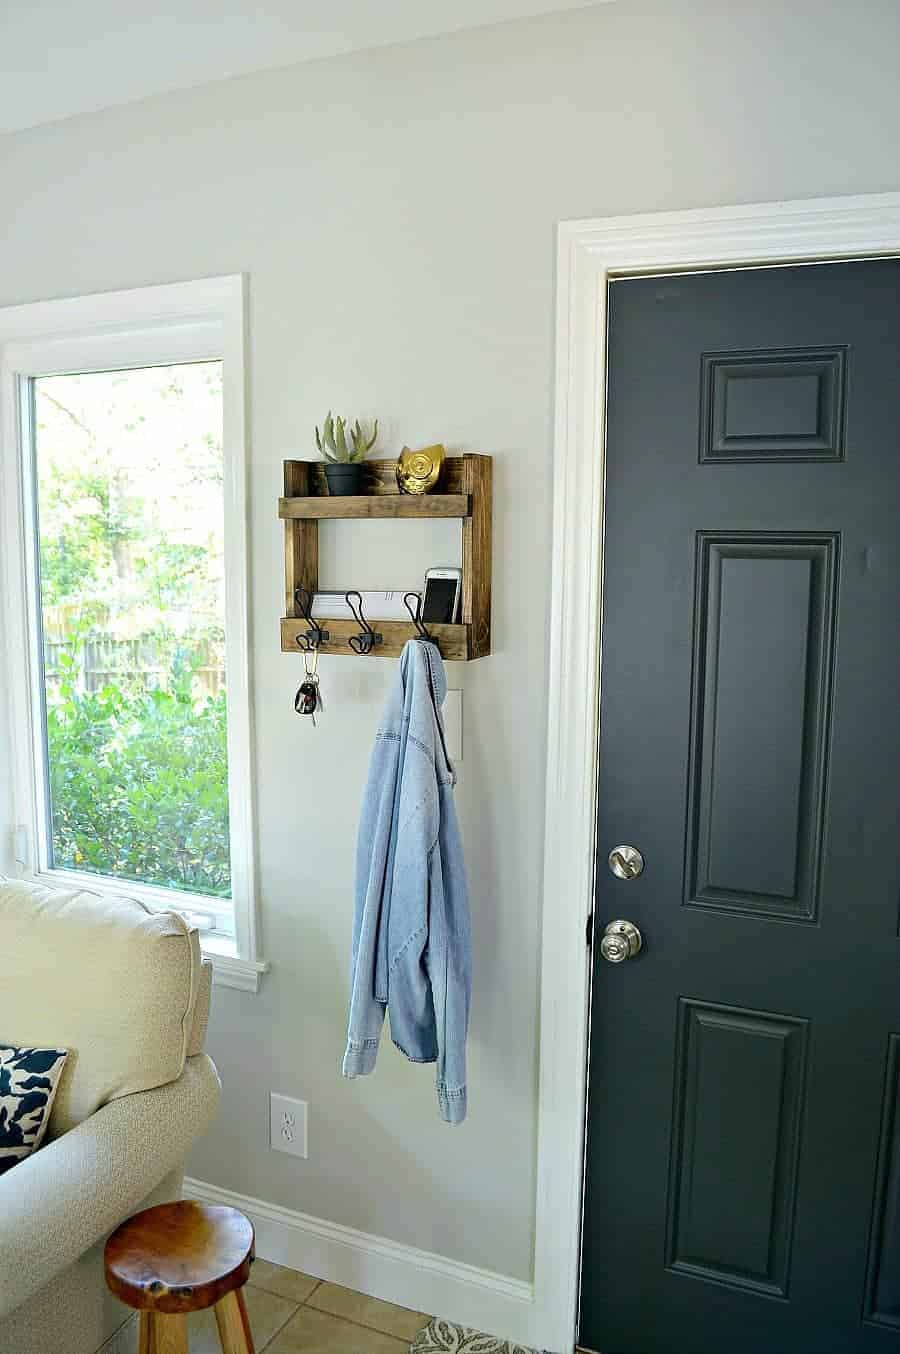 Wall Mounted Coat Rack With Storage